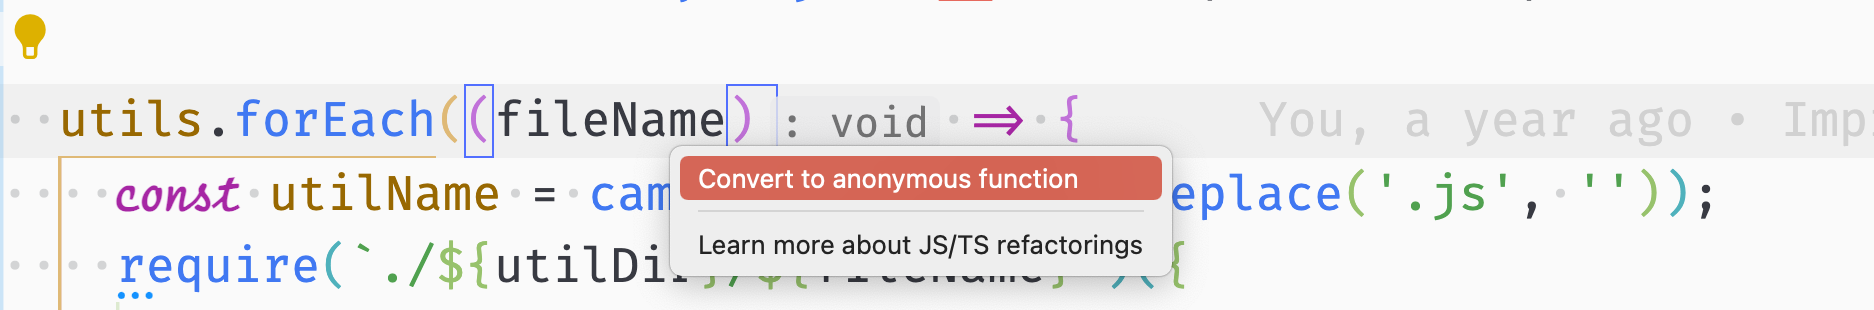 VS Code window showing the available code action of "converting to anonymous function"